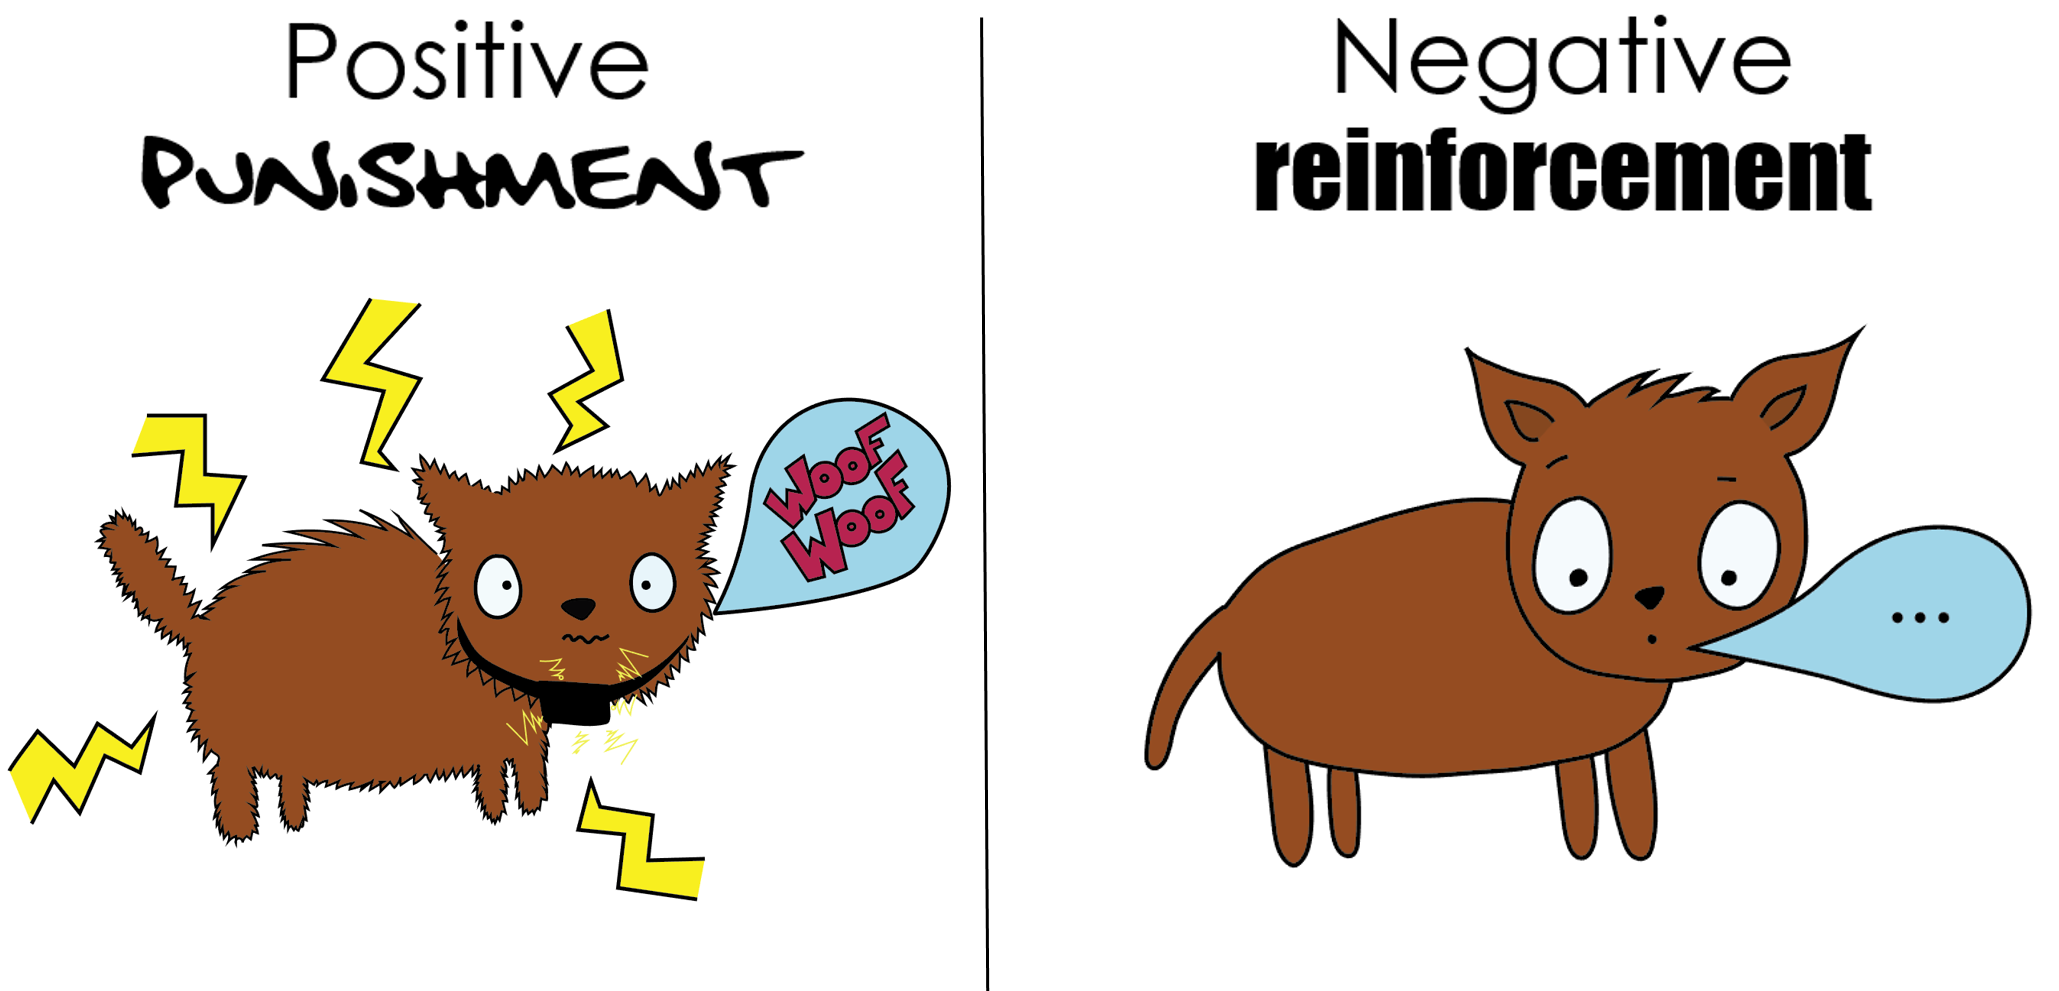 Positive punishment and negative reinforcement side-by-side